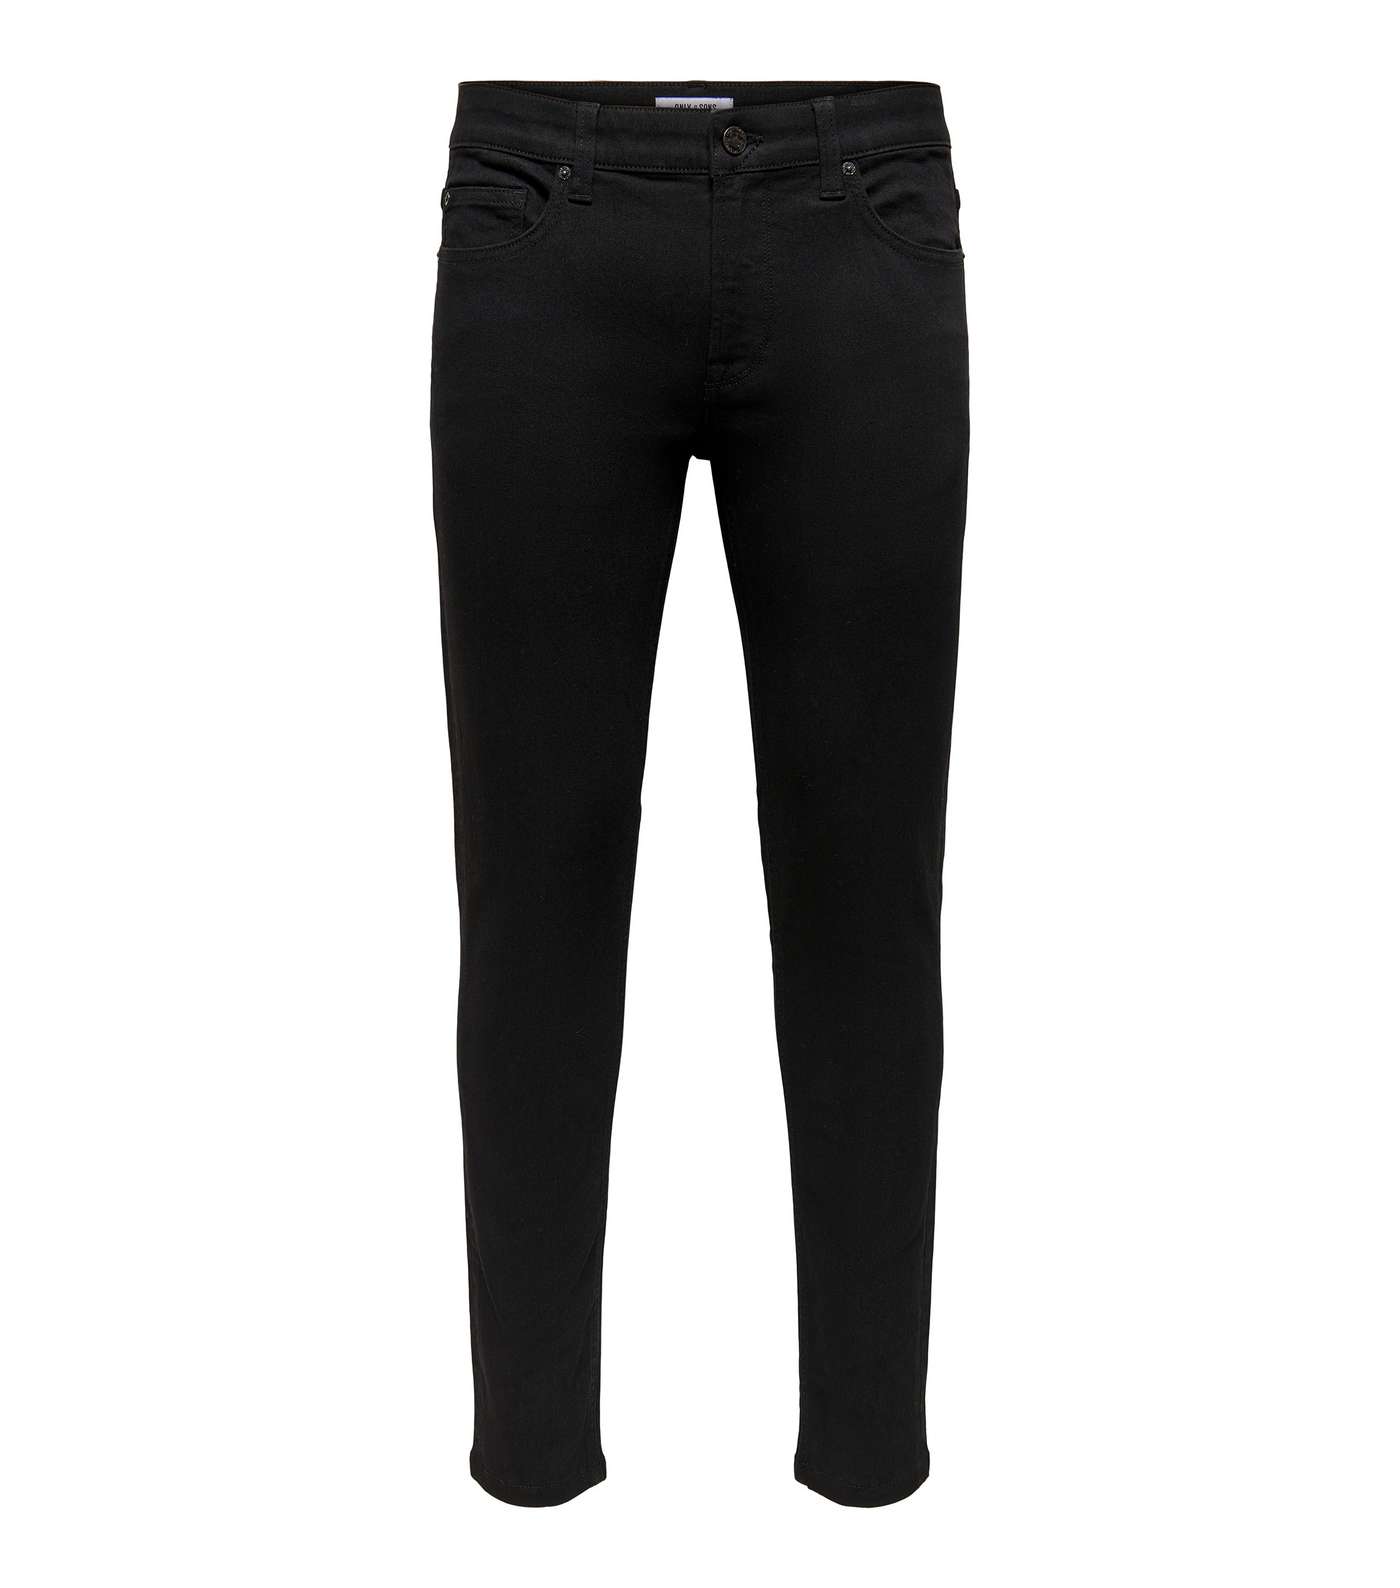 Only & Sons Black Skinny Jeans Image 5